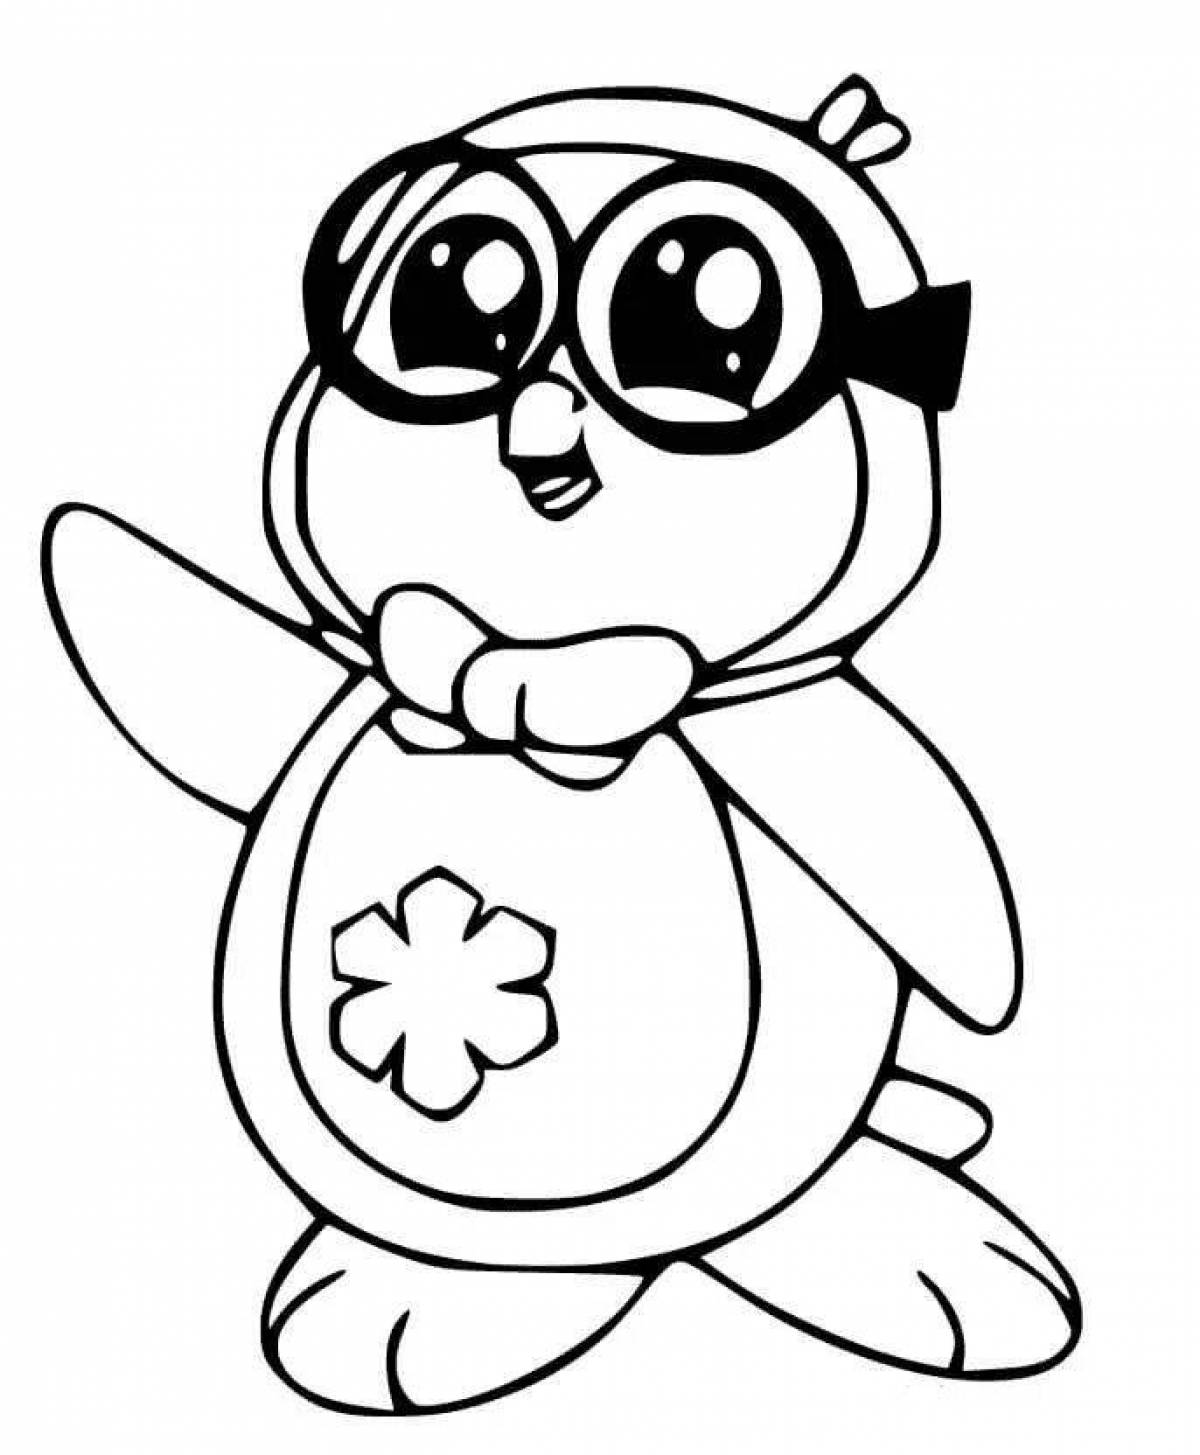 Adorable penguin coloring pages